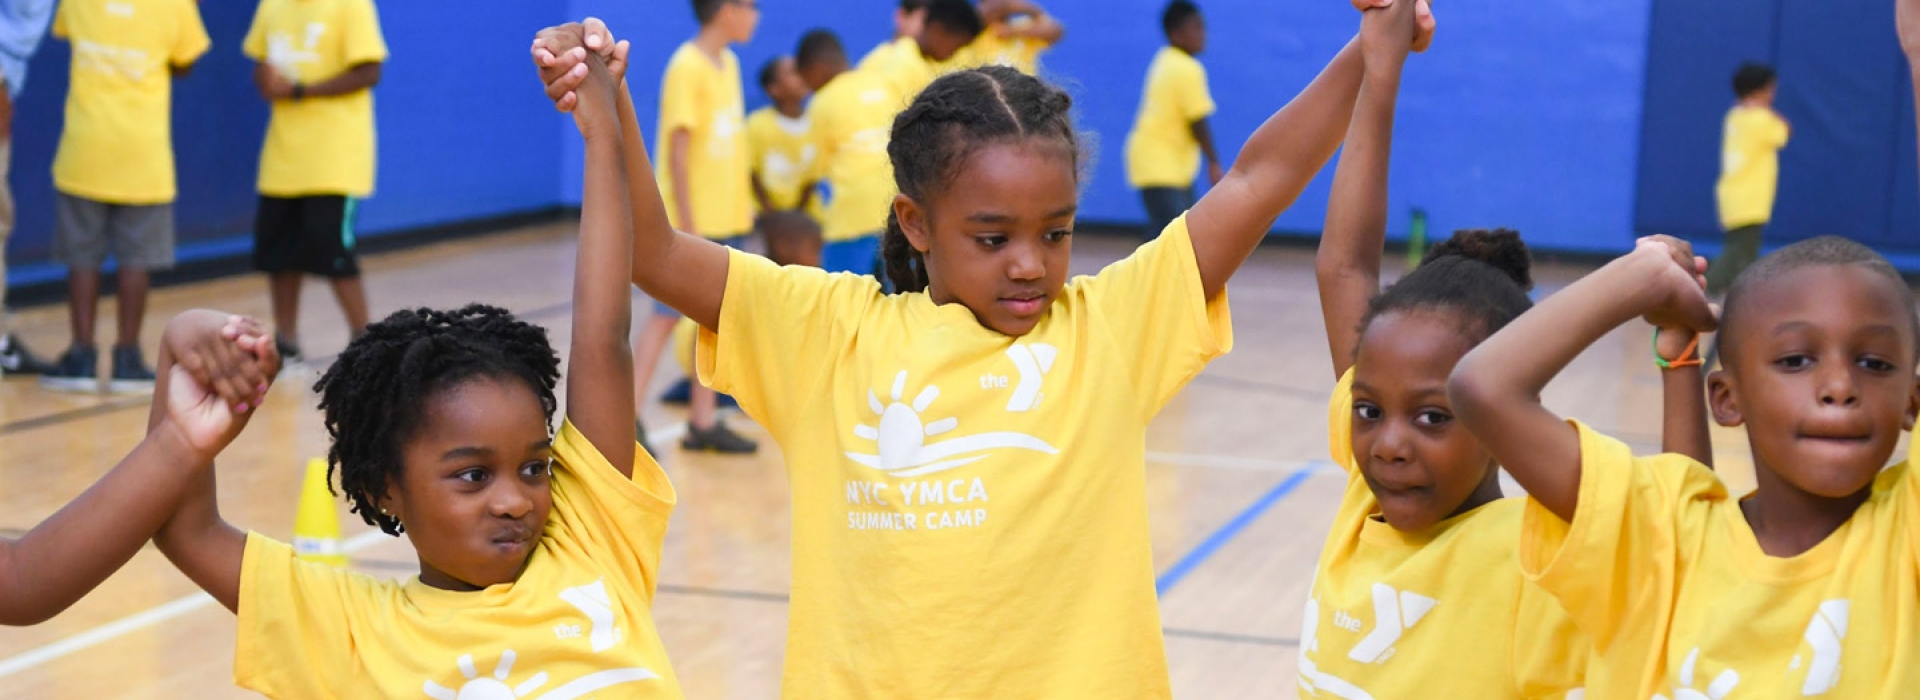 Summer Camp at the Jamaica YMCA Safe, Affordable, and Fun for Kids